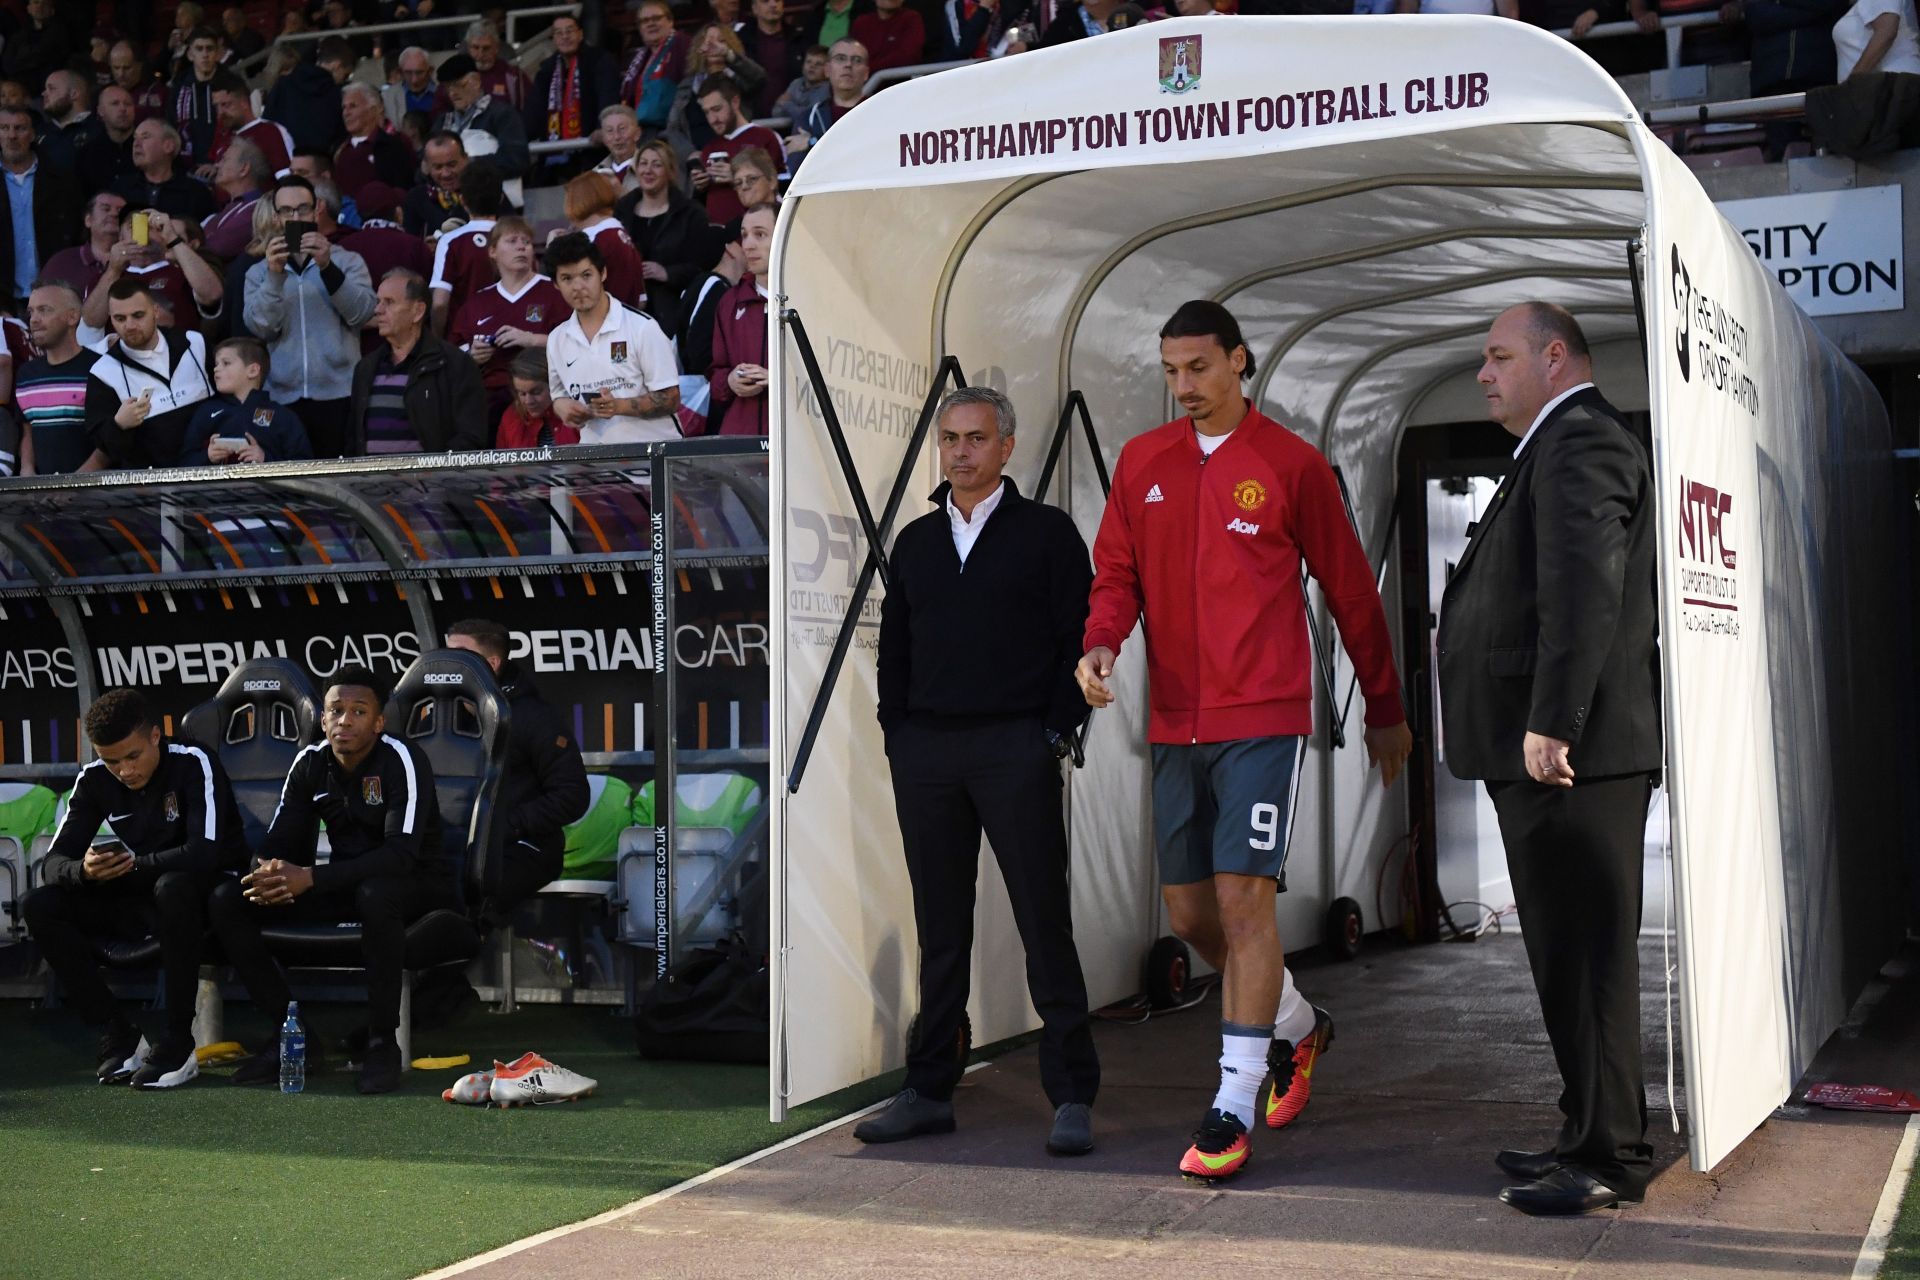 Zlatan Ibrahimovic (R) and Jose Mourinho (L) emerge from the tunnel.